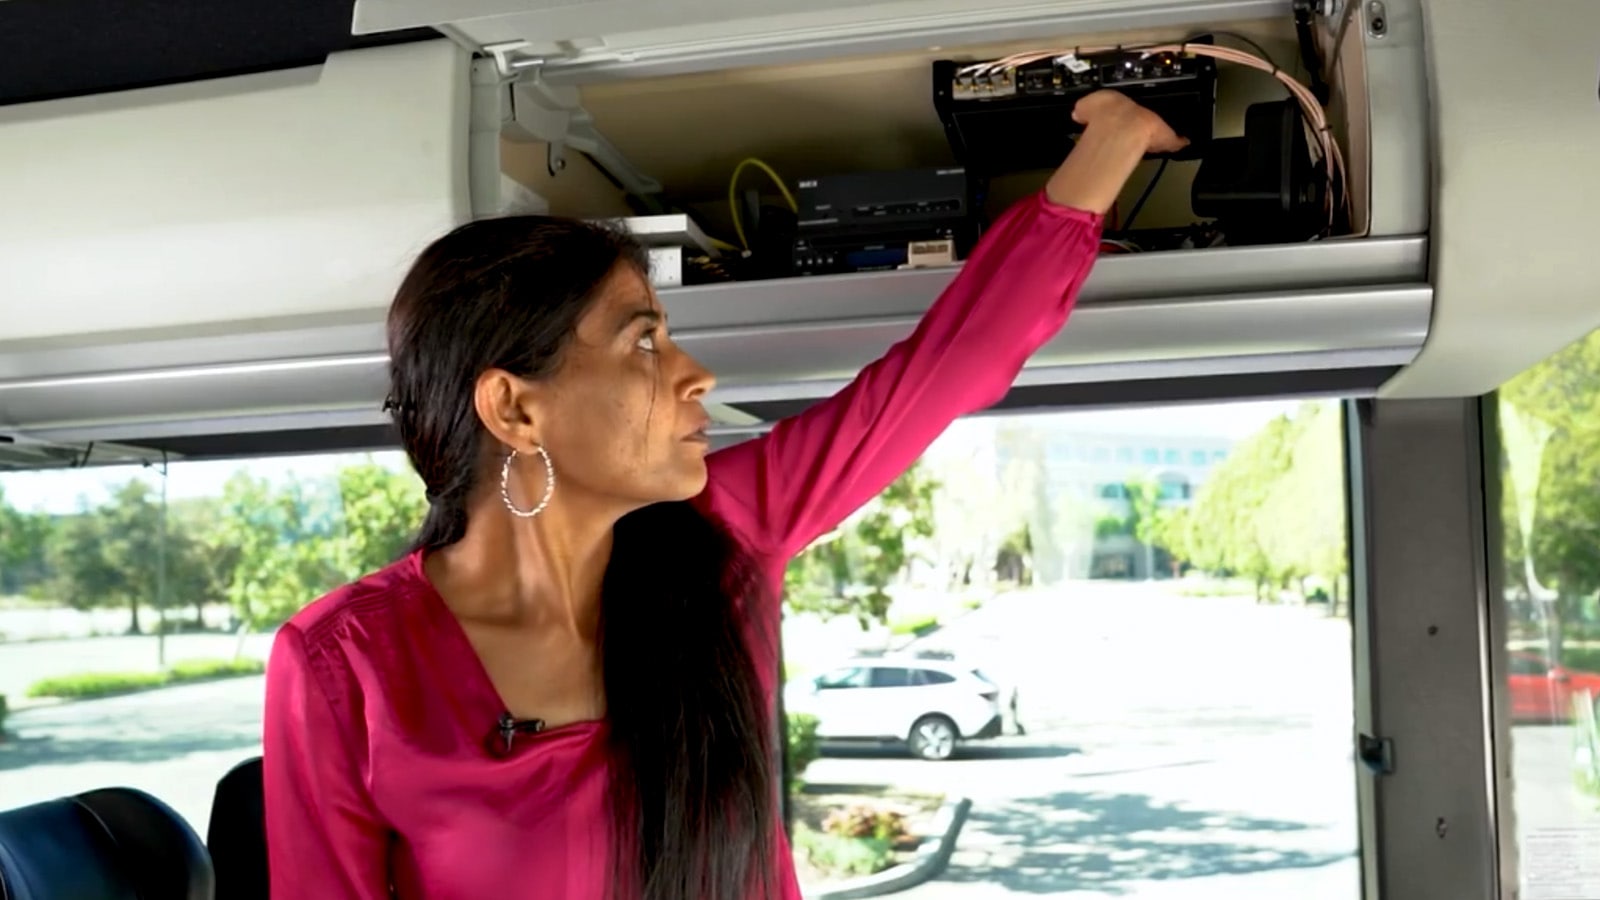 Cisco Catalyst IR1800 Rugged Series Router providing connectivity on bus